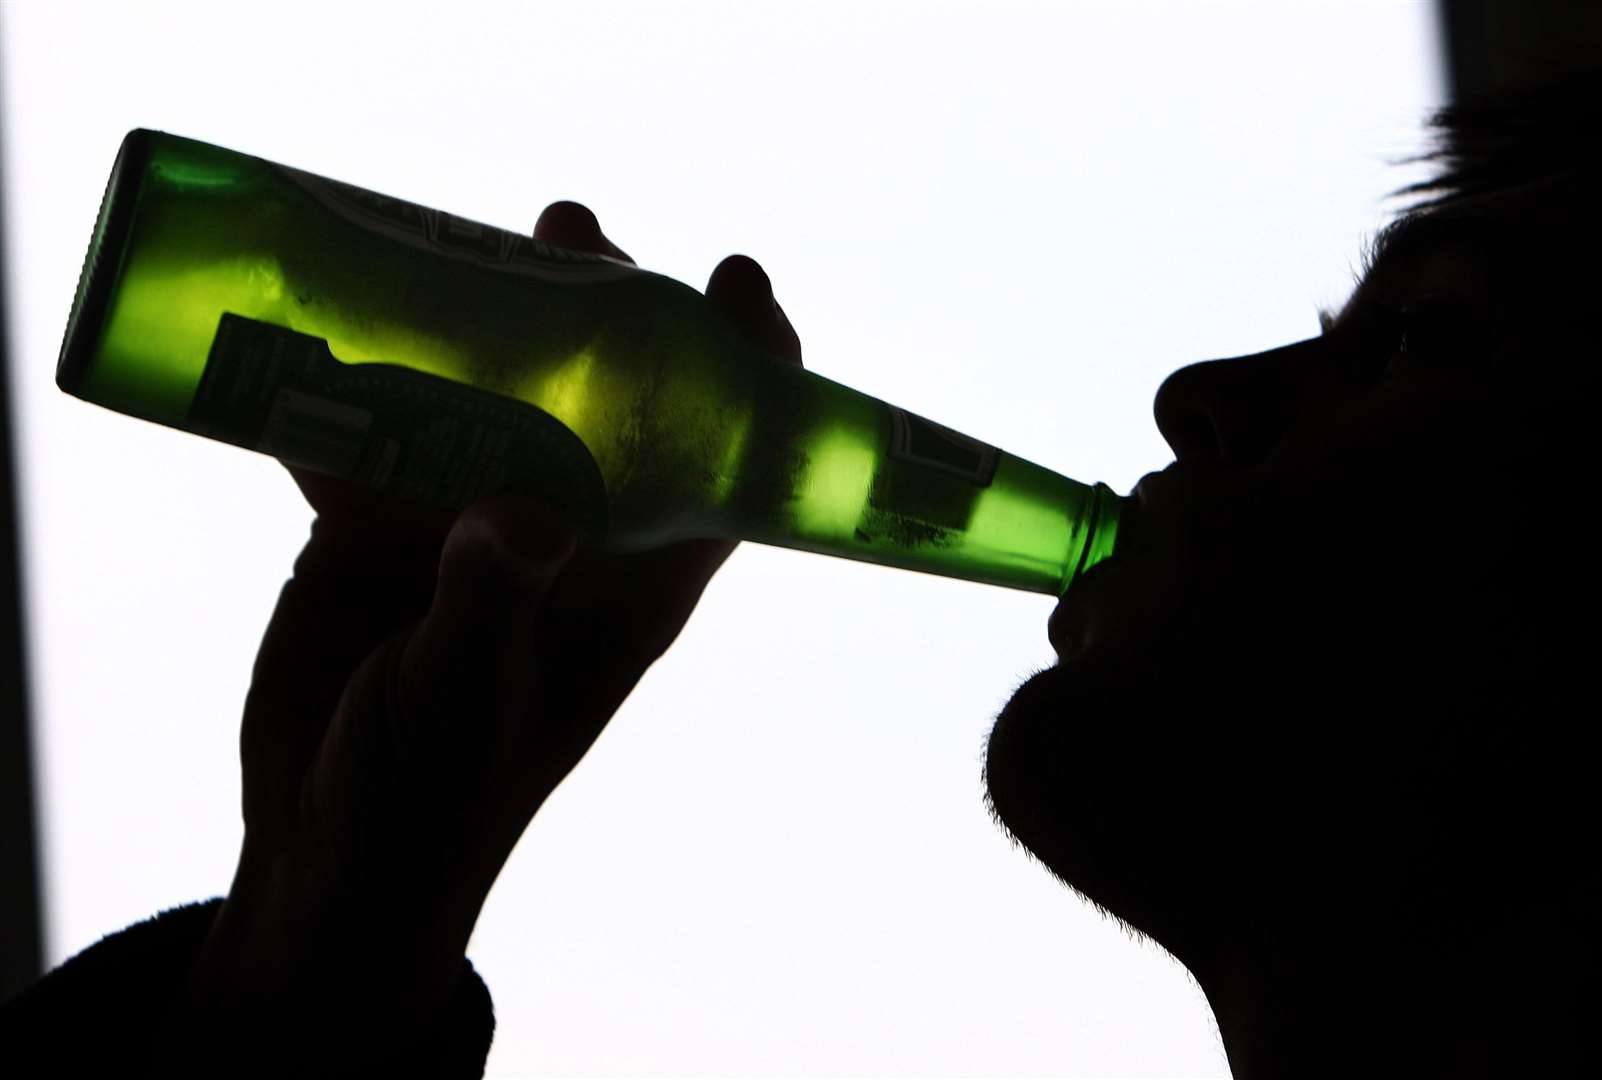 Gravesham council is consulting on an extension of powers to prevent problem drinking in controlled areas of the town centre.